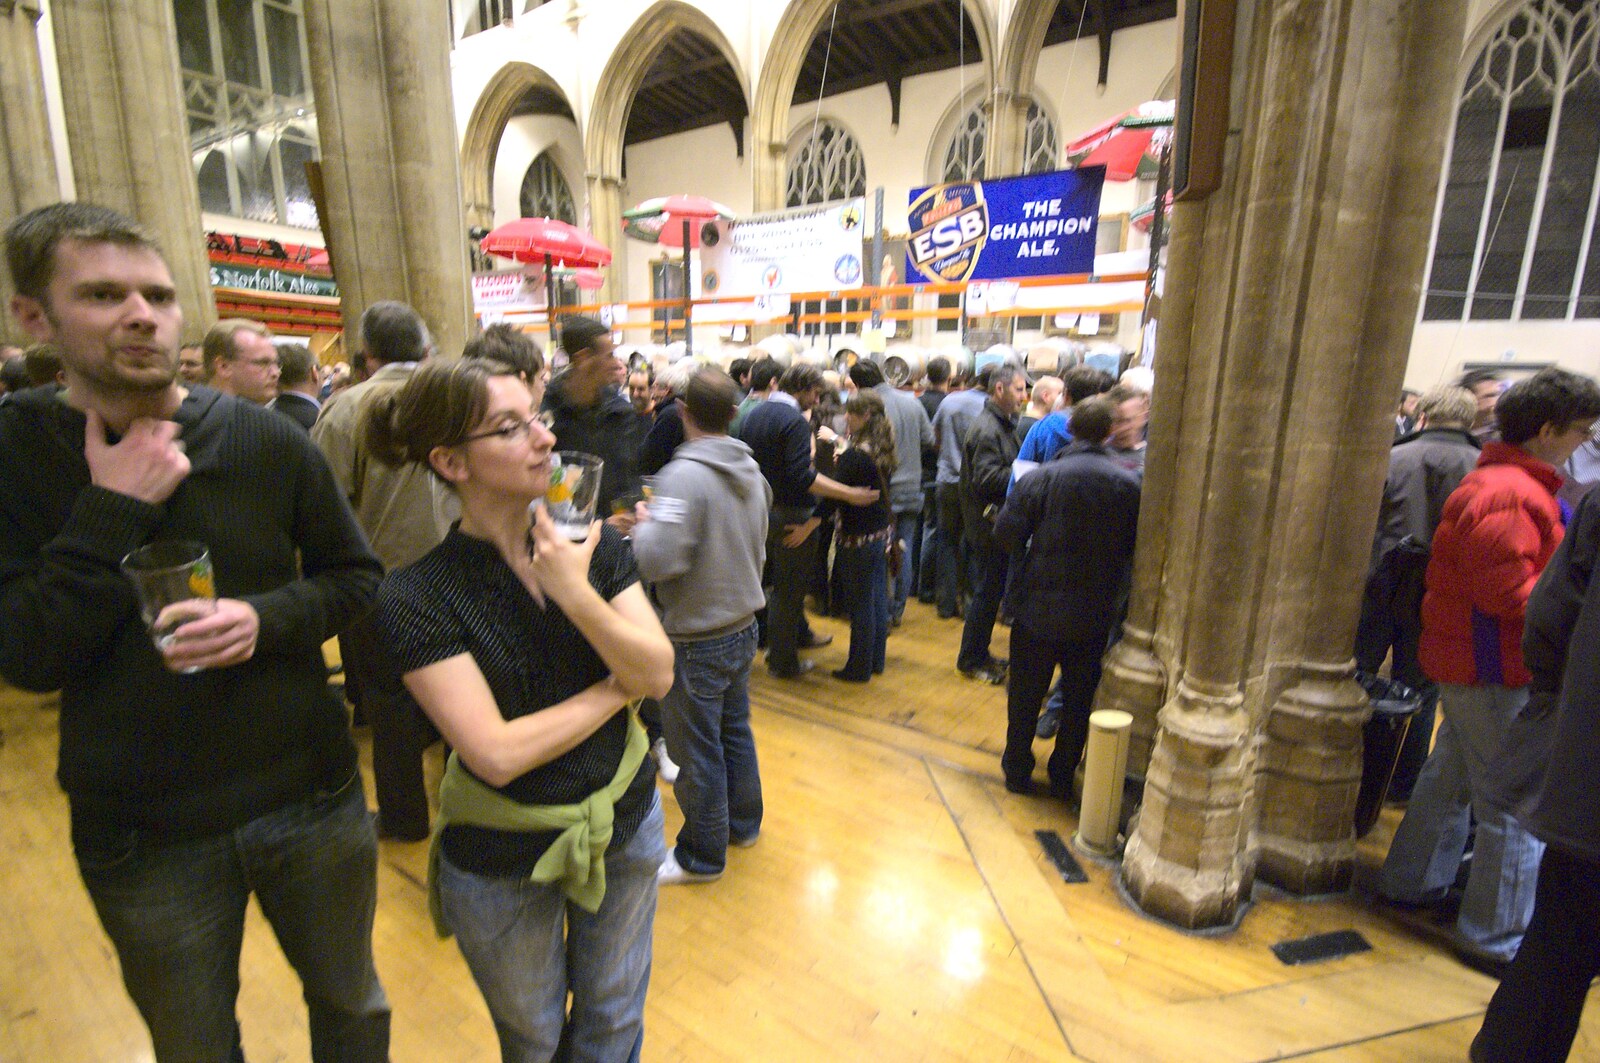 Phil and Suey contemplate their next beer from The Norwich Beer Festival, St. Andrew's Hall, Norwich, Norfolk - 27th October 2010